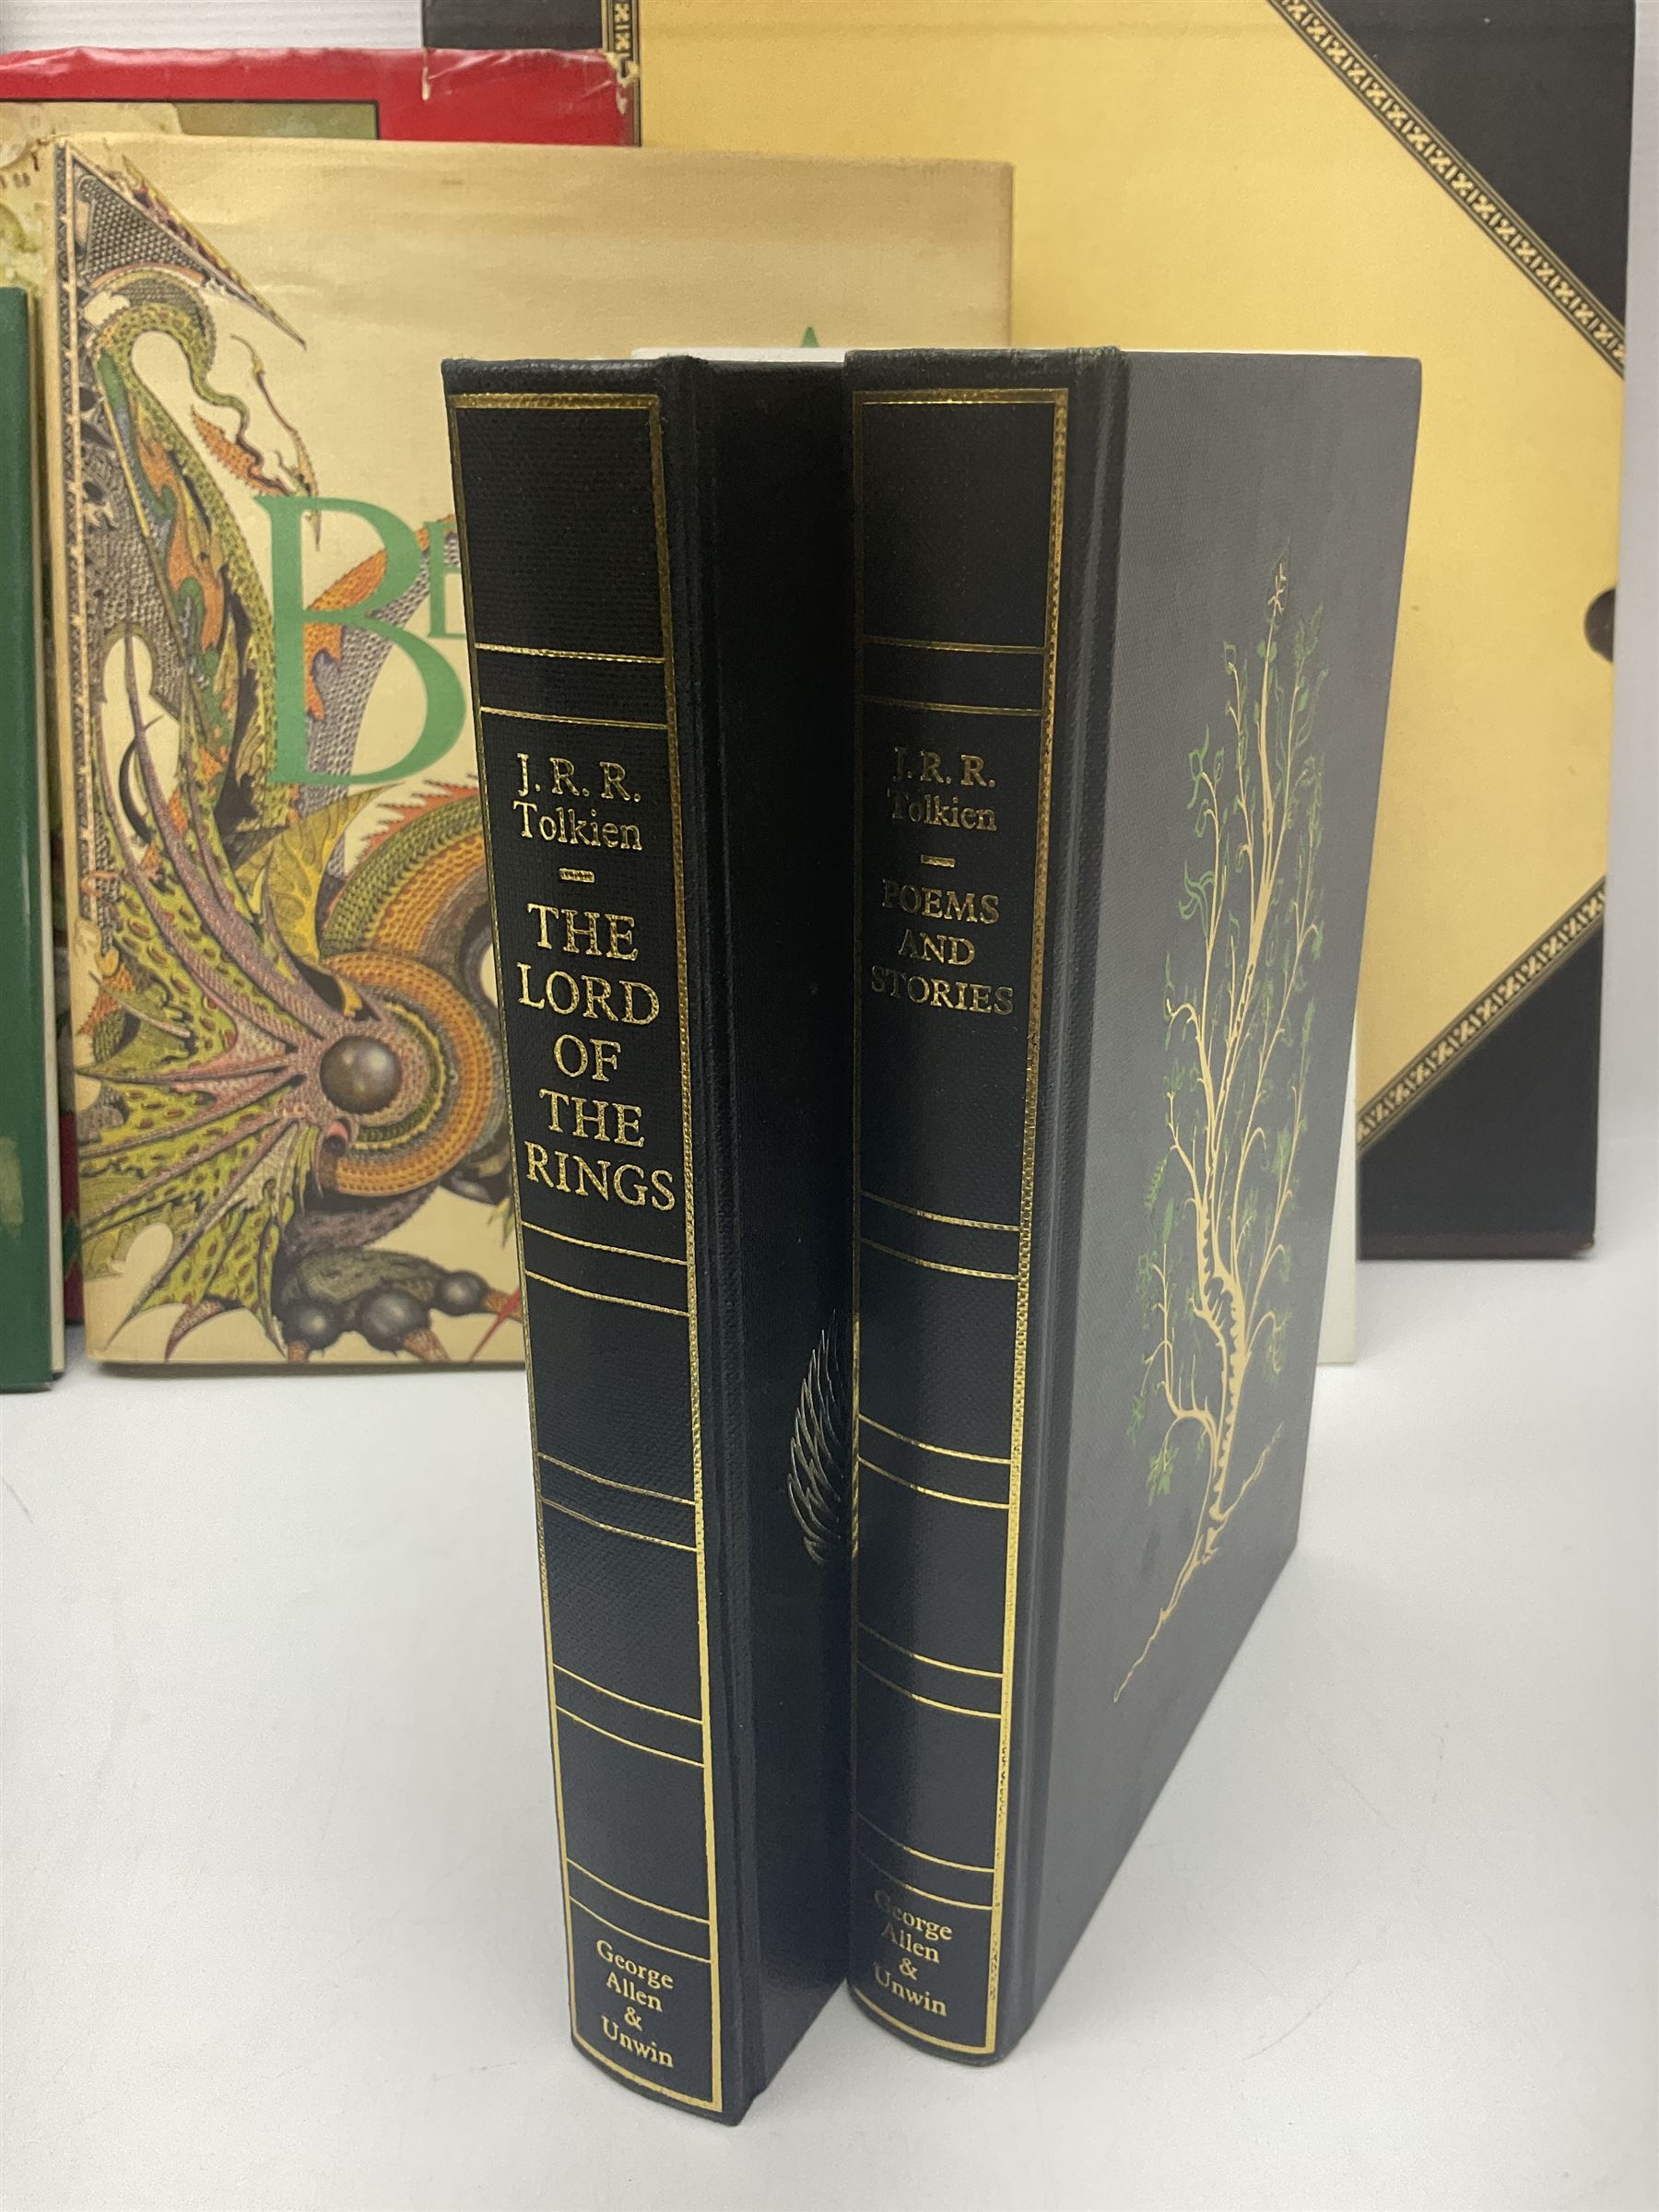 J.R.R. Tolkien 'The Lord of the Rings' Deluxe Edition seventh impression and 'Poems and Stories' pub - Image 3 of 23